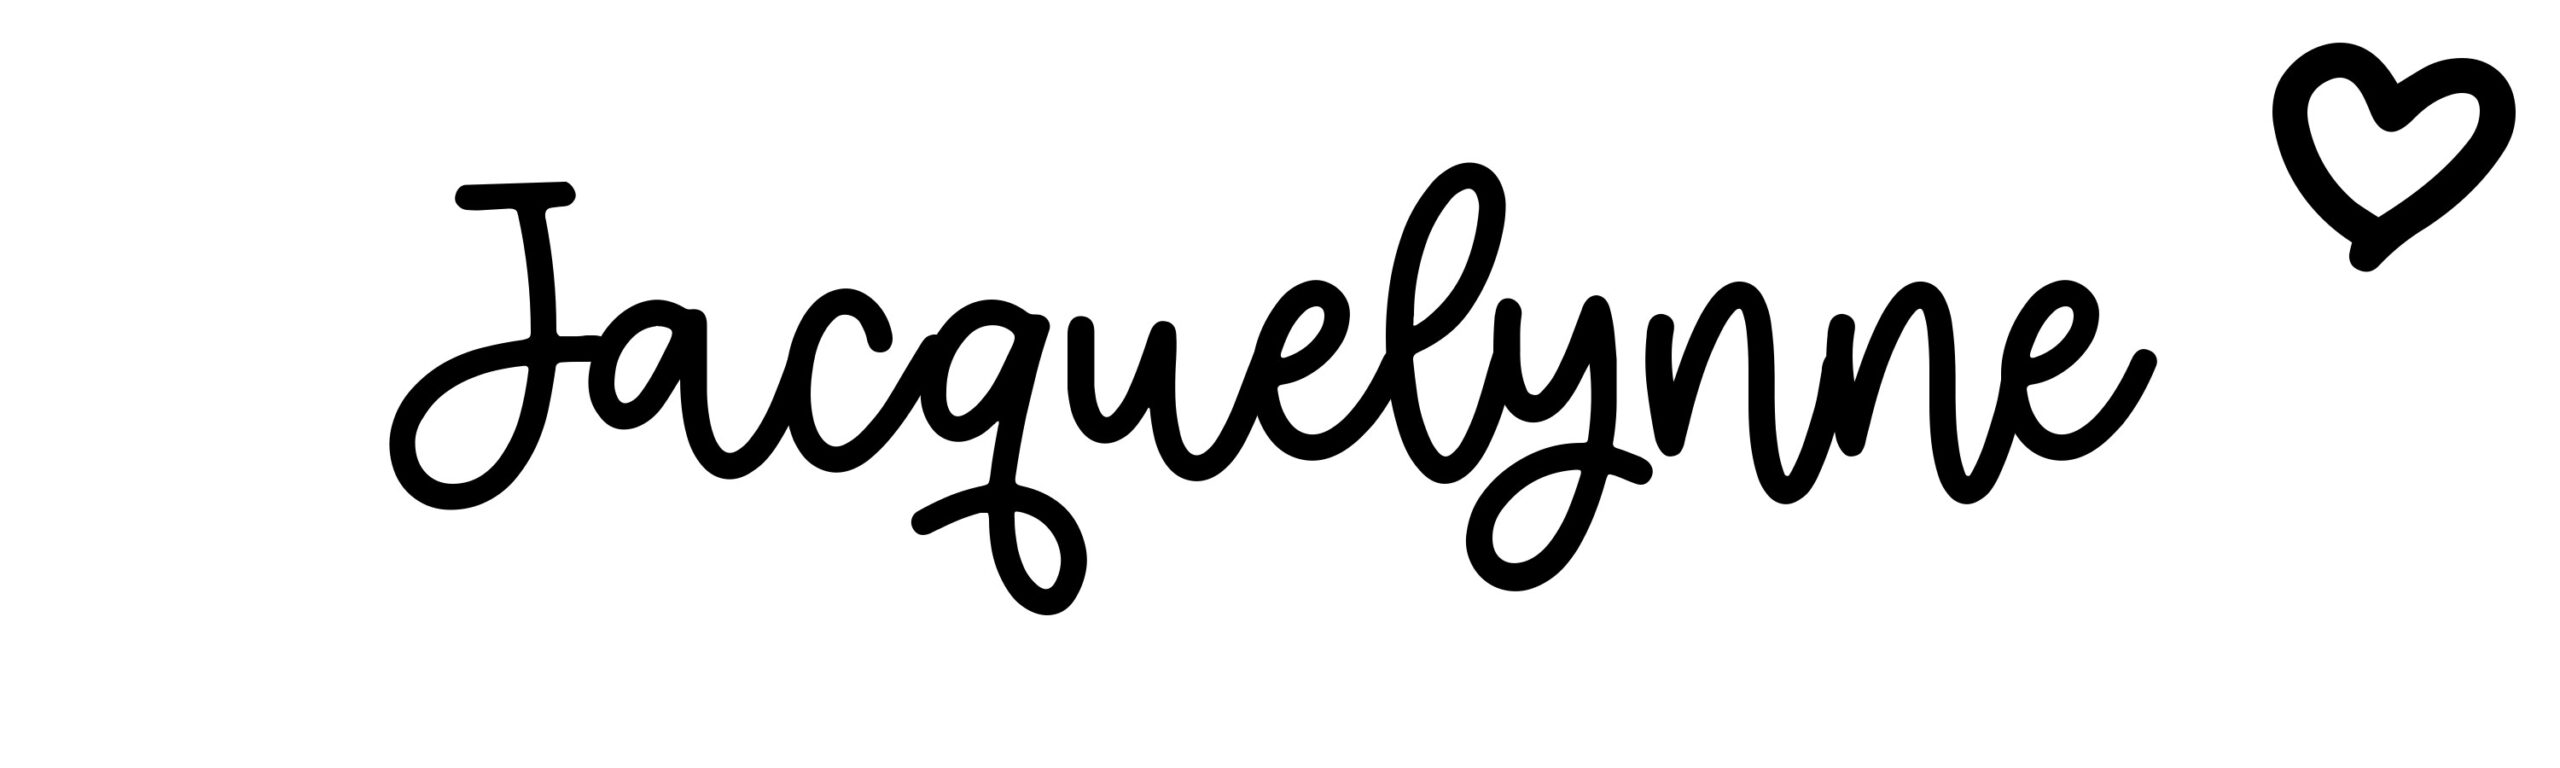 Jacquelynne - Name meaning, origin, variations and more